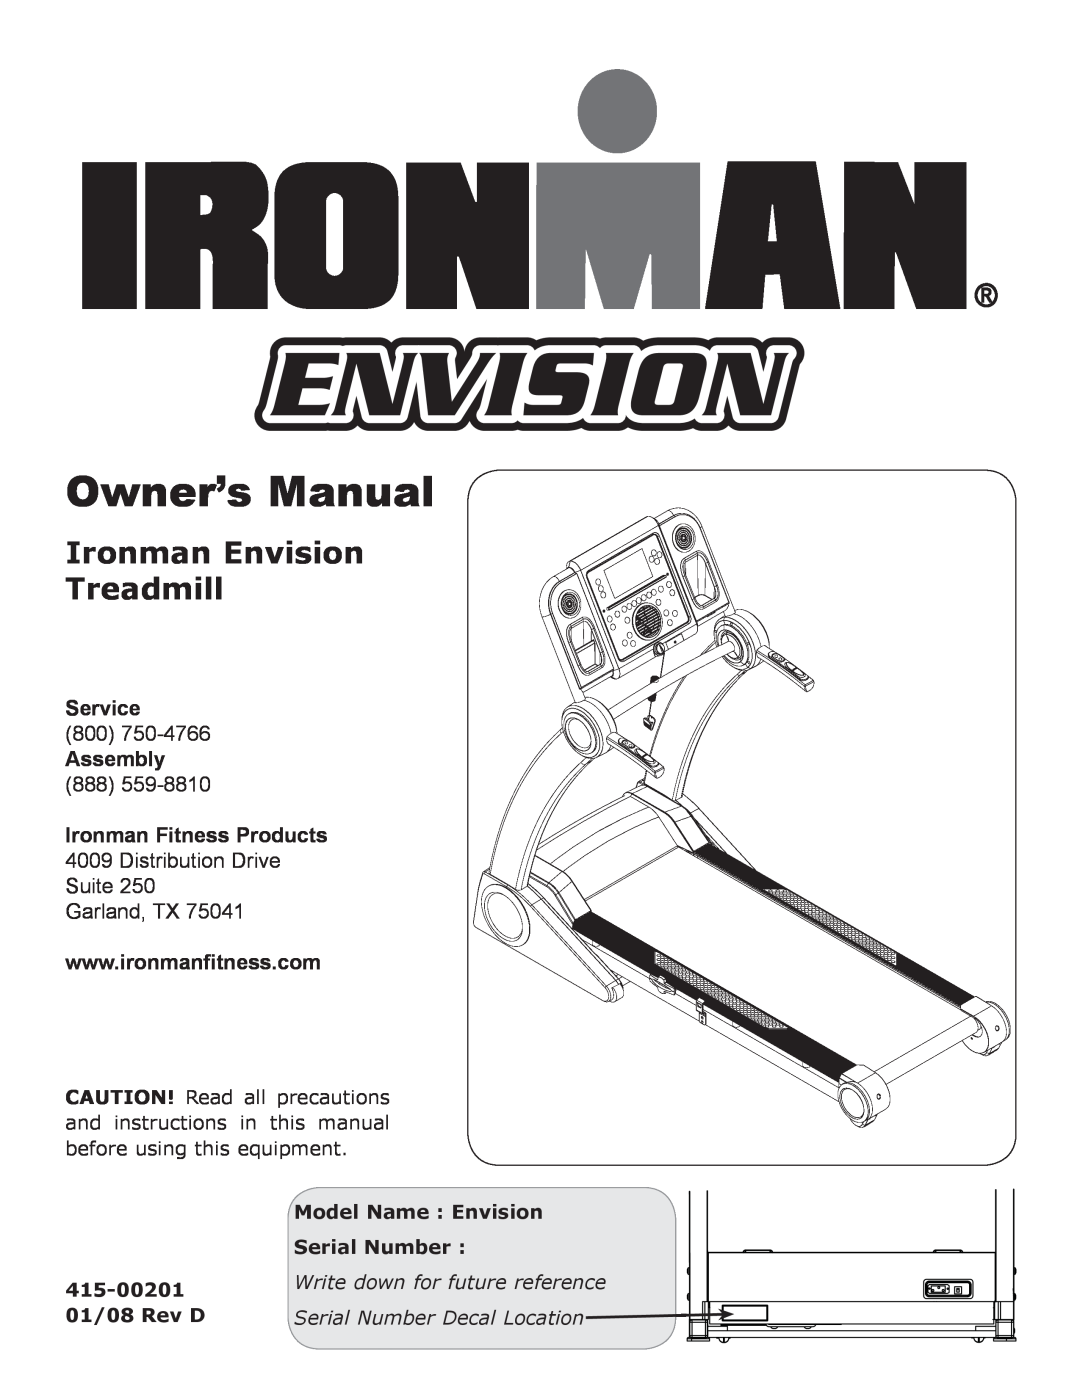 Ironman Fitness owner manual Ironman Envision Treadmill, Owner’s Manual, Service, Assembly, Ironman Fitness Products 